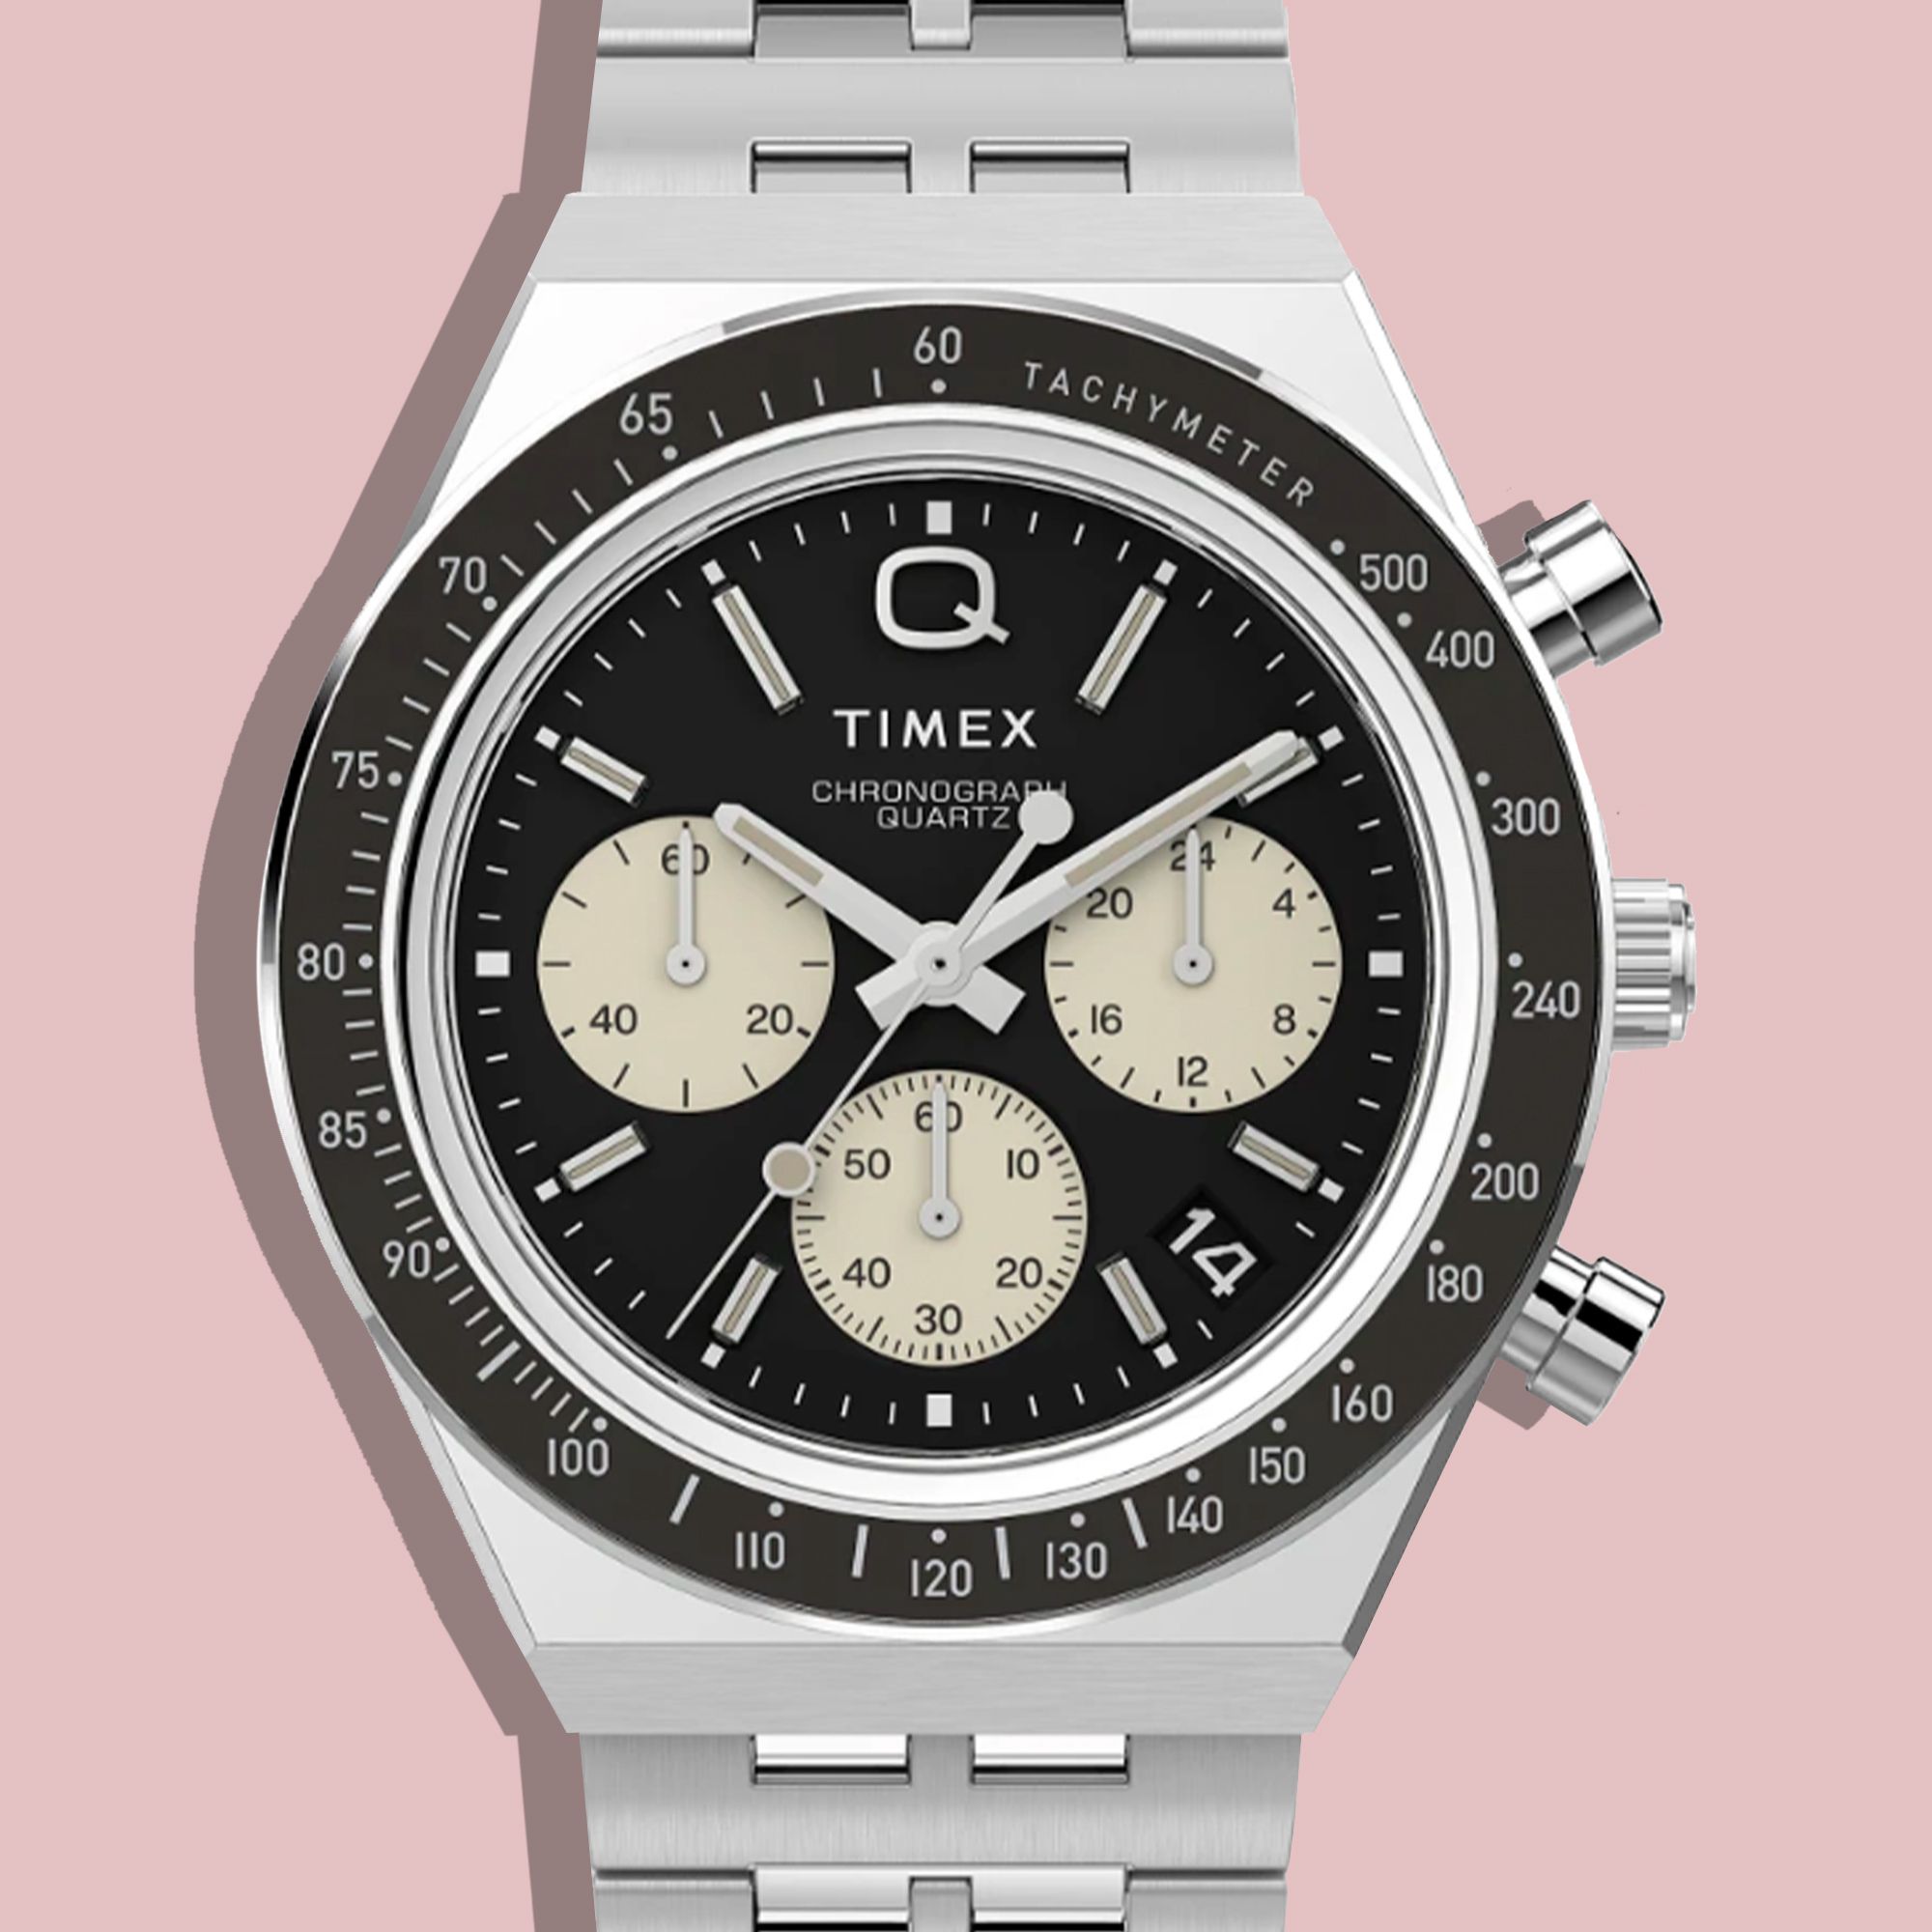 The New Q Timex Chronograph Is Catnip for Vintage Lovers